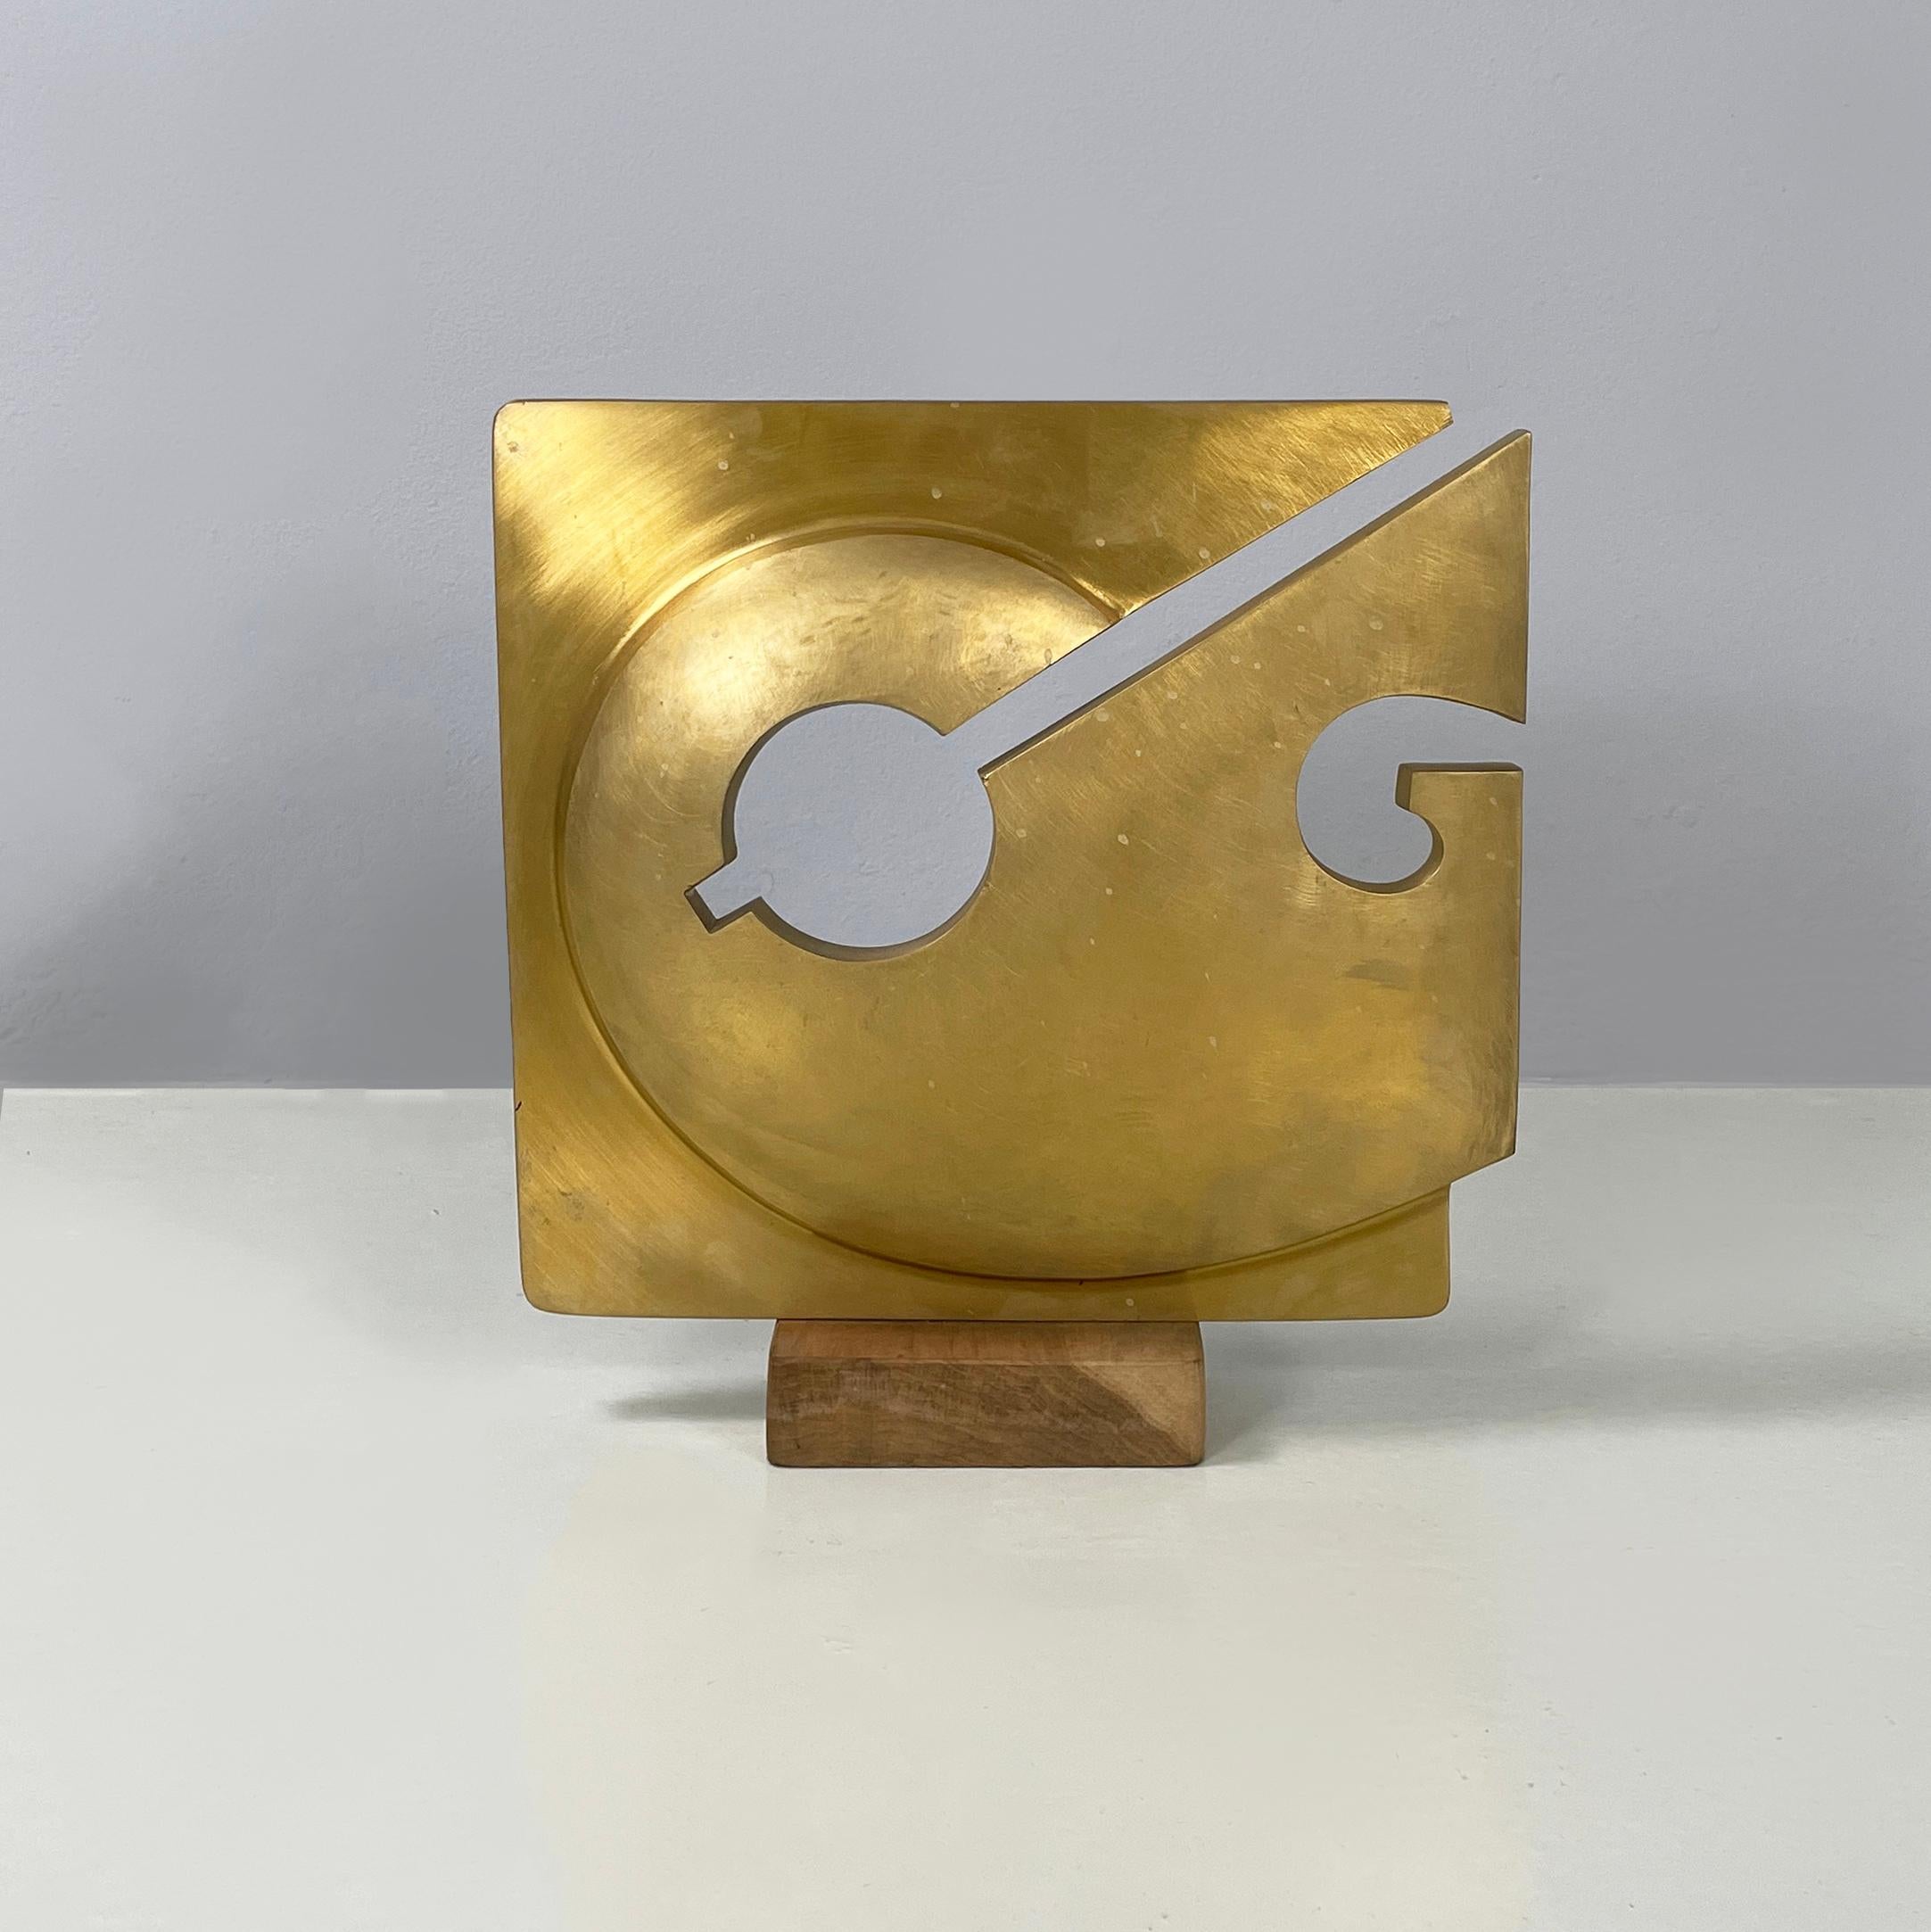 Italian modern brutalist Brass sculpture by Edmondo Cirillo, 1970s
Brass sculpture with a rectangular base with reference to the brutalist style. The front of the sculpture is square and curved with perforated parts, which gives it a dynamic shape.